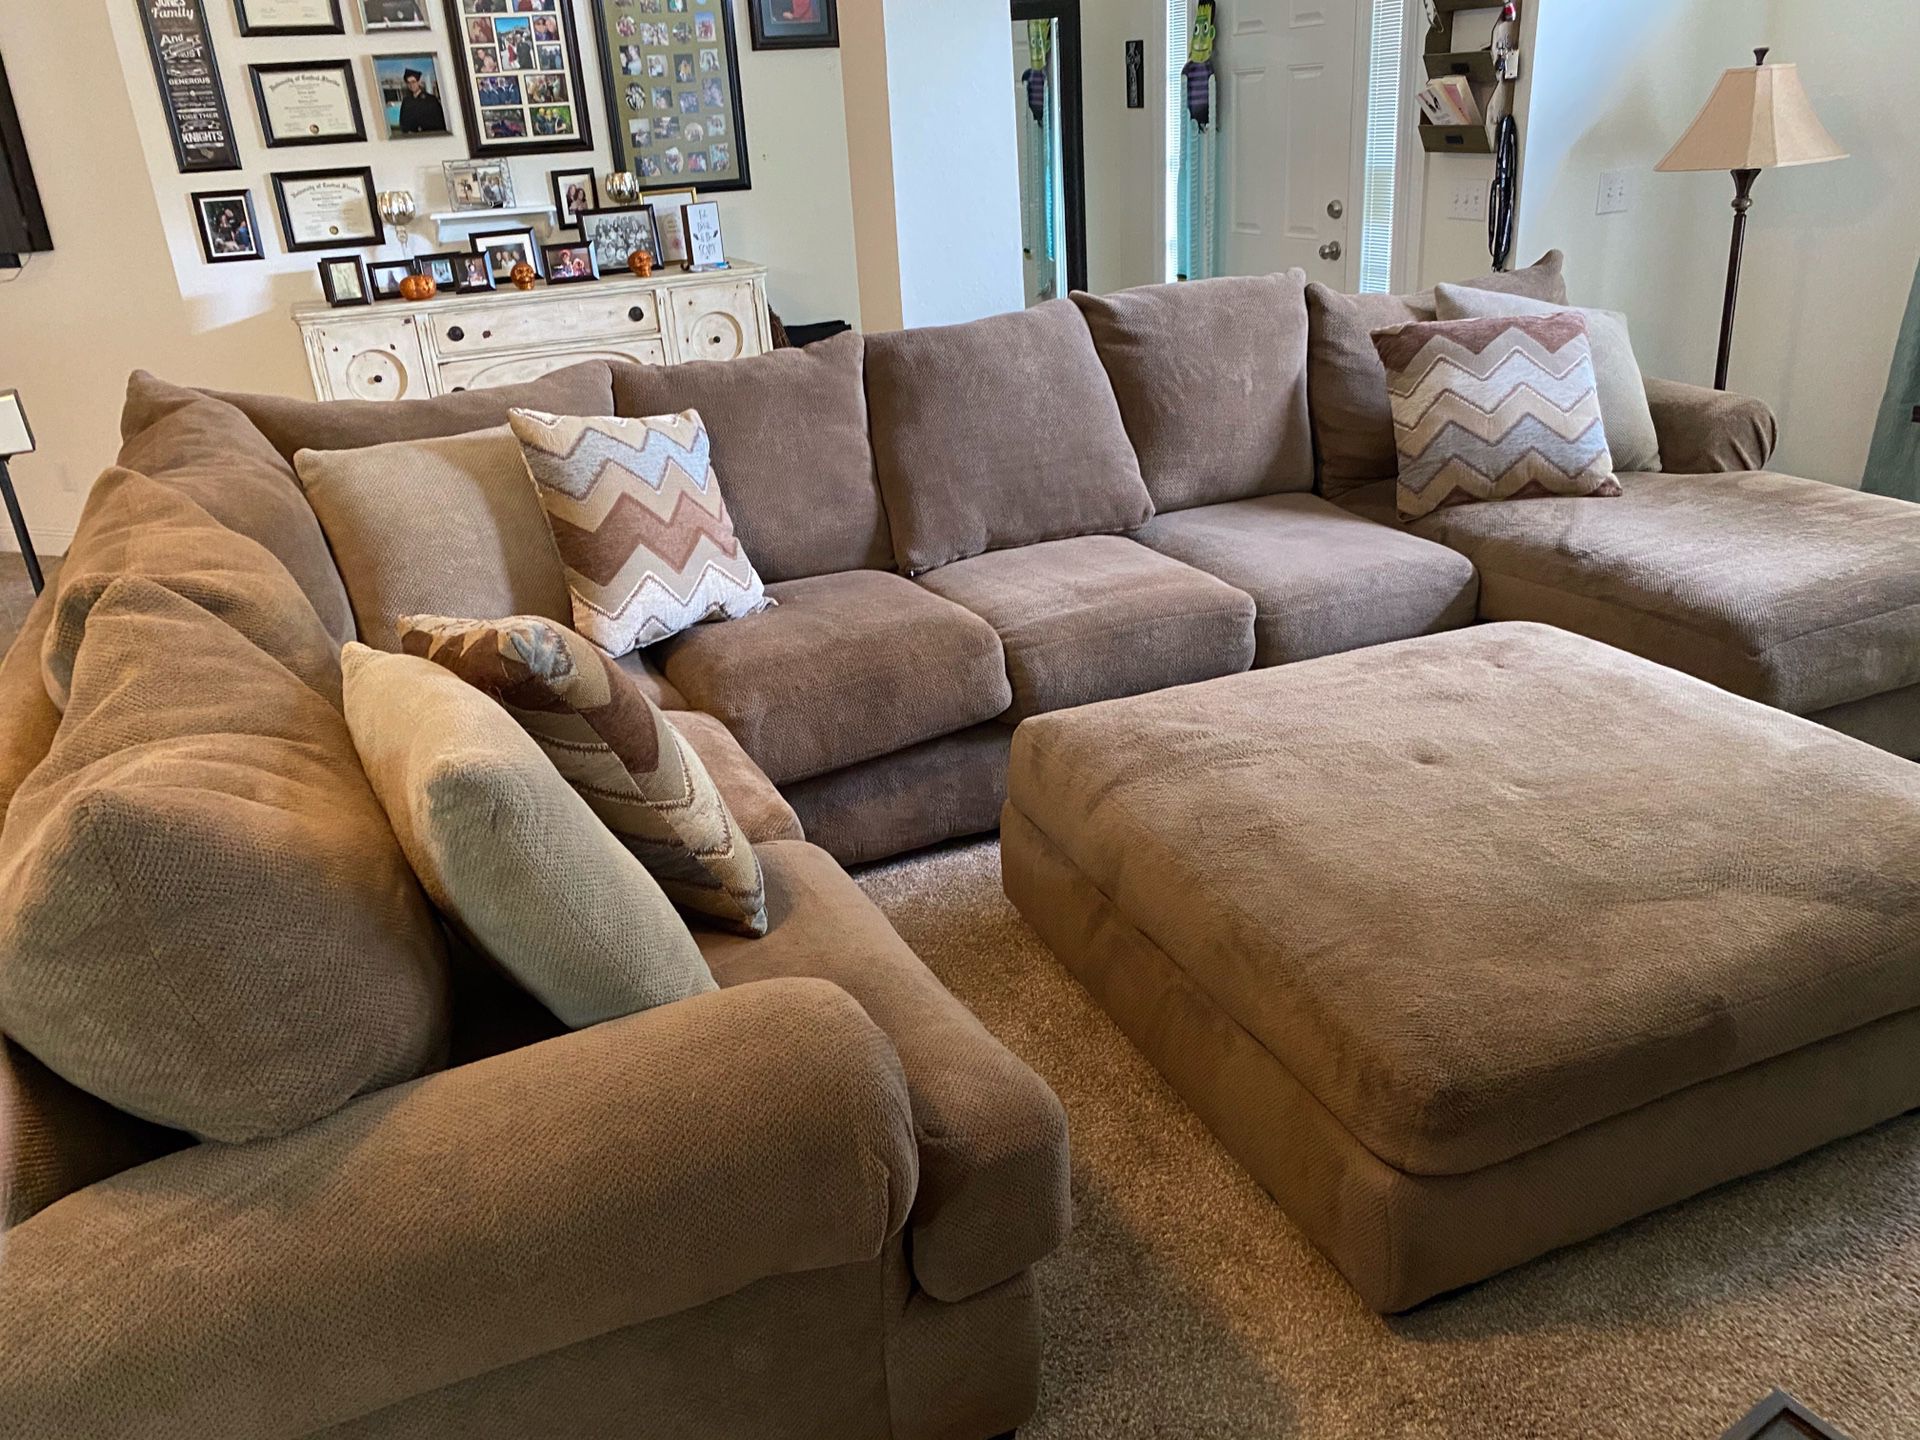 Large sectional with oversized ottoman